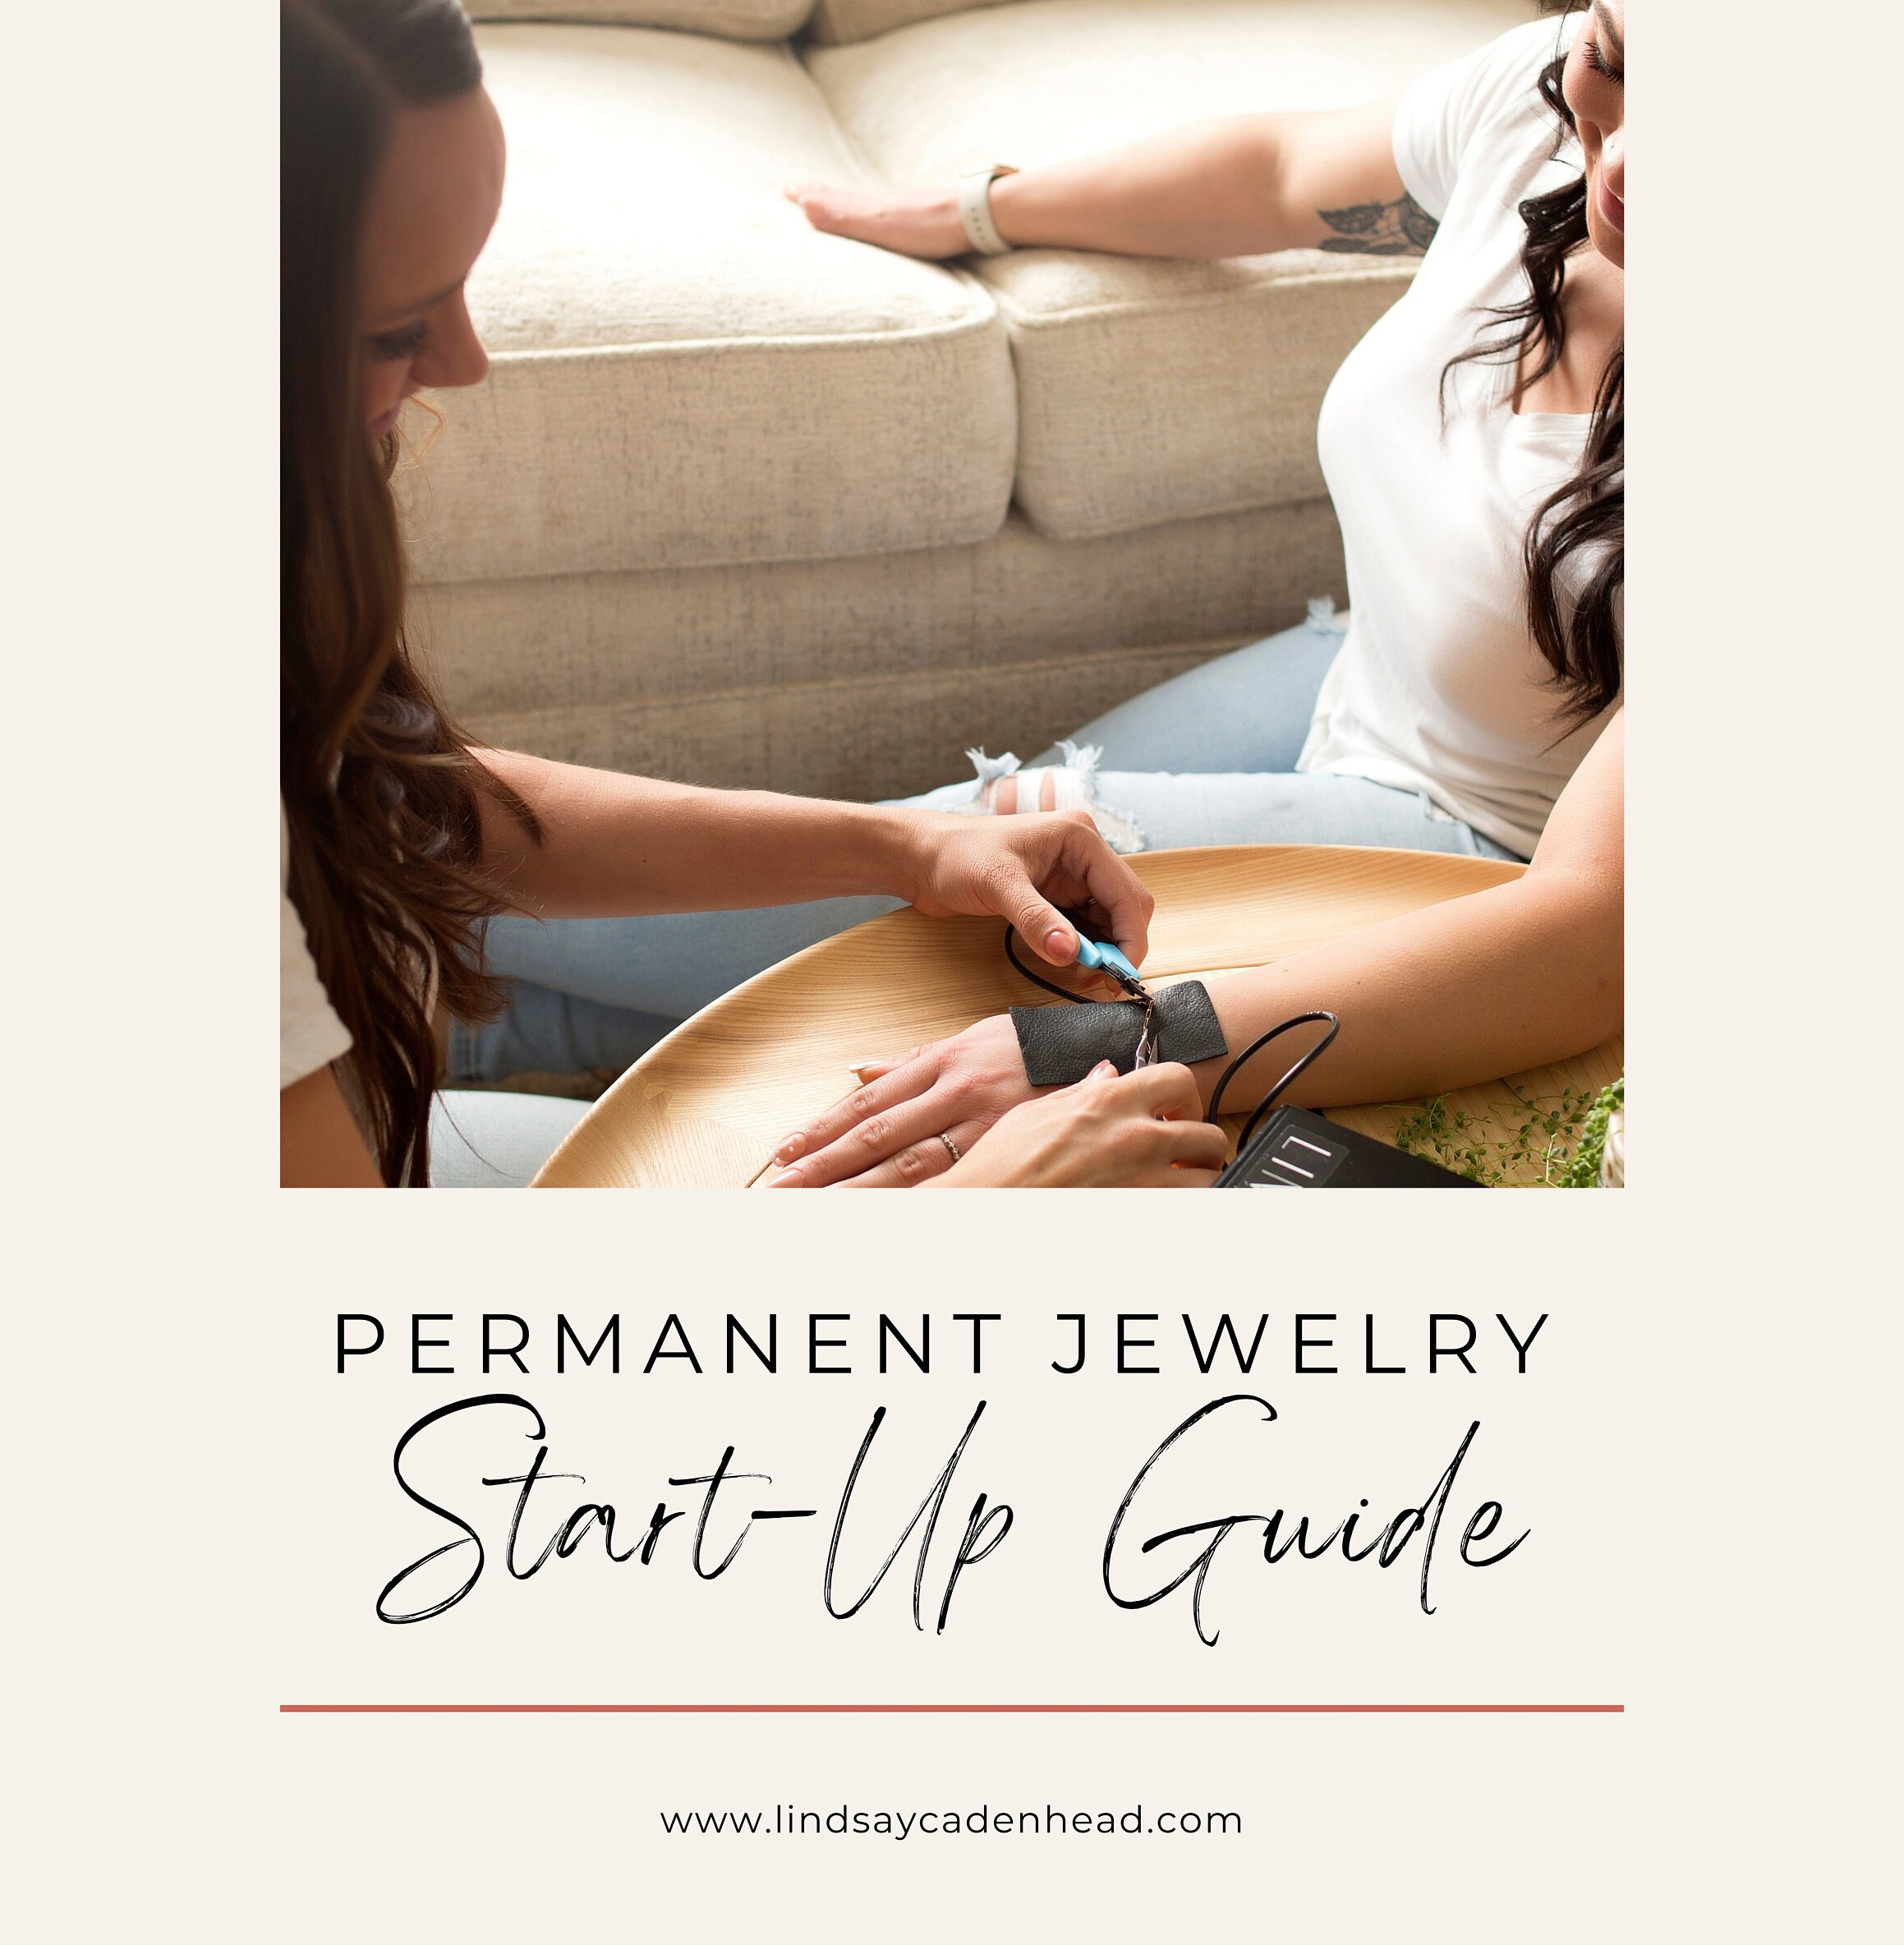 Permanent Jewelry Business Starter Pack Permanent Jewelry Kit All Supplies  Required to Start Permanent Jewelry Business No Guess Work 